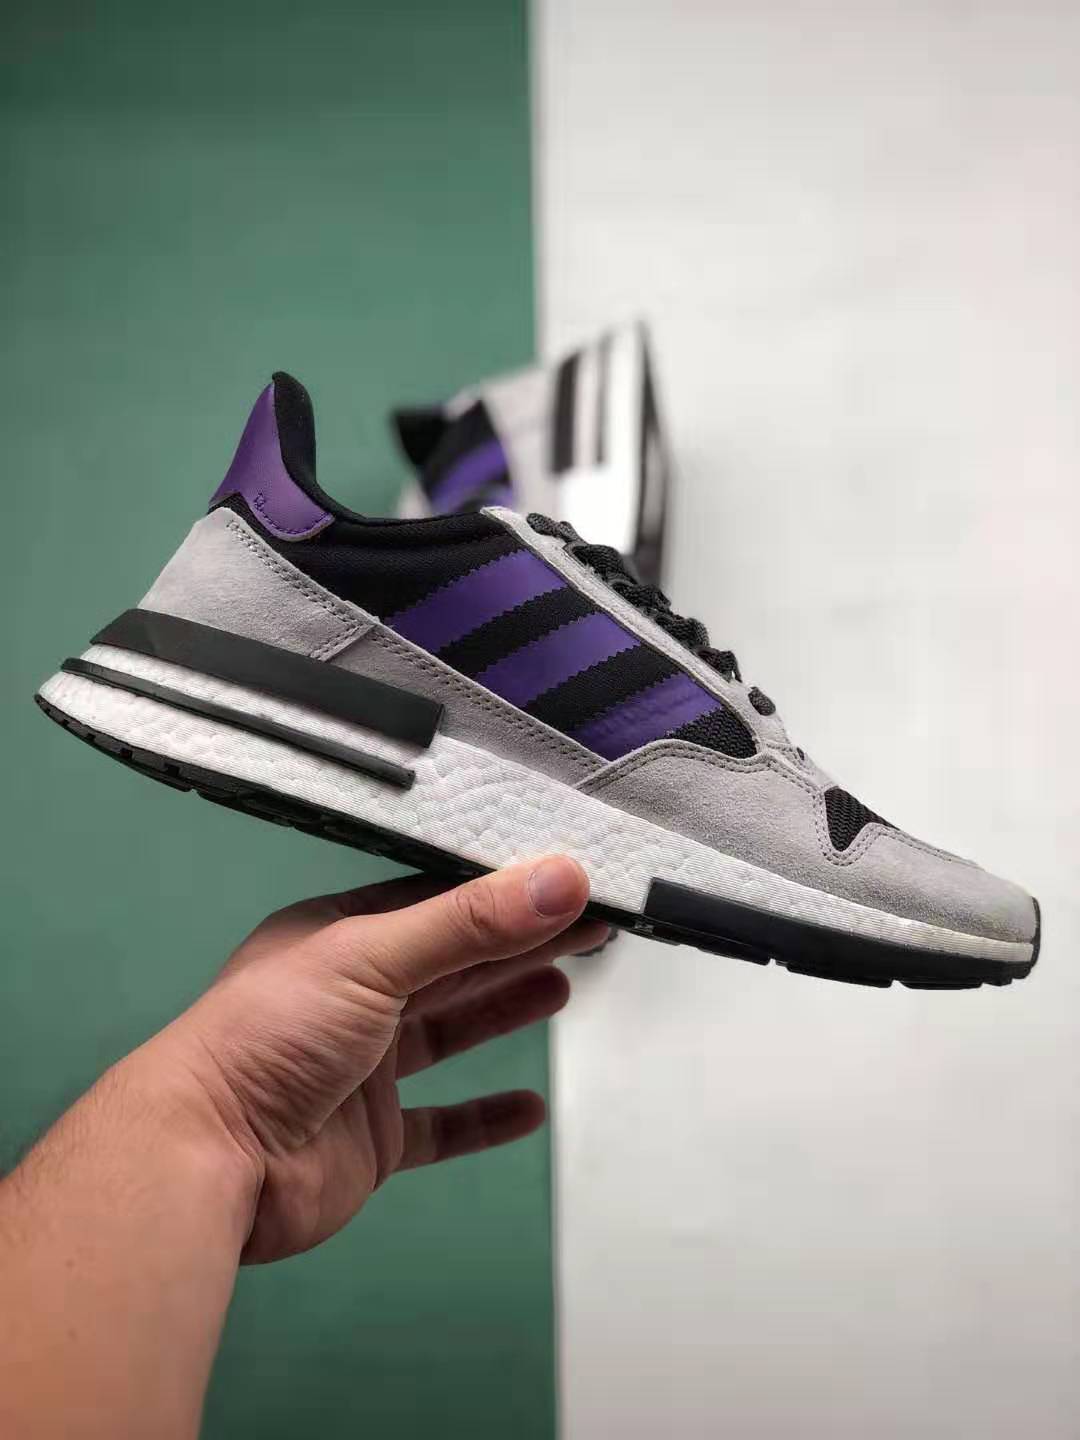 Adidas Size X ZX 500 Black Purple F36913 | Limited Edition Sneakers